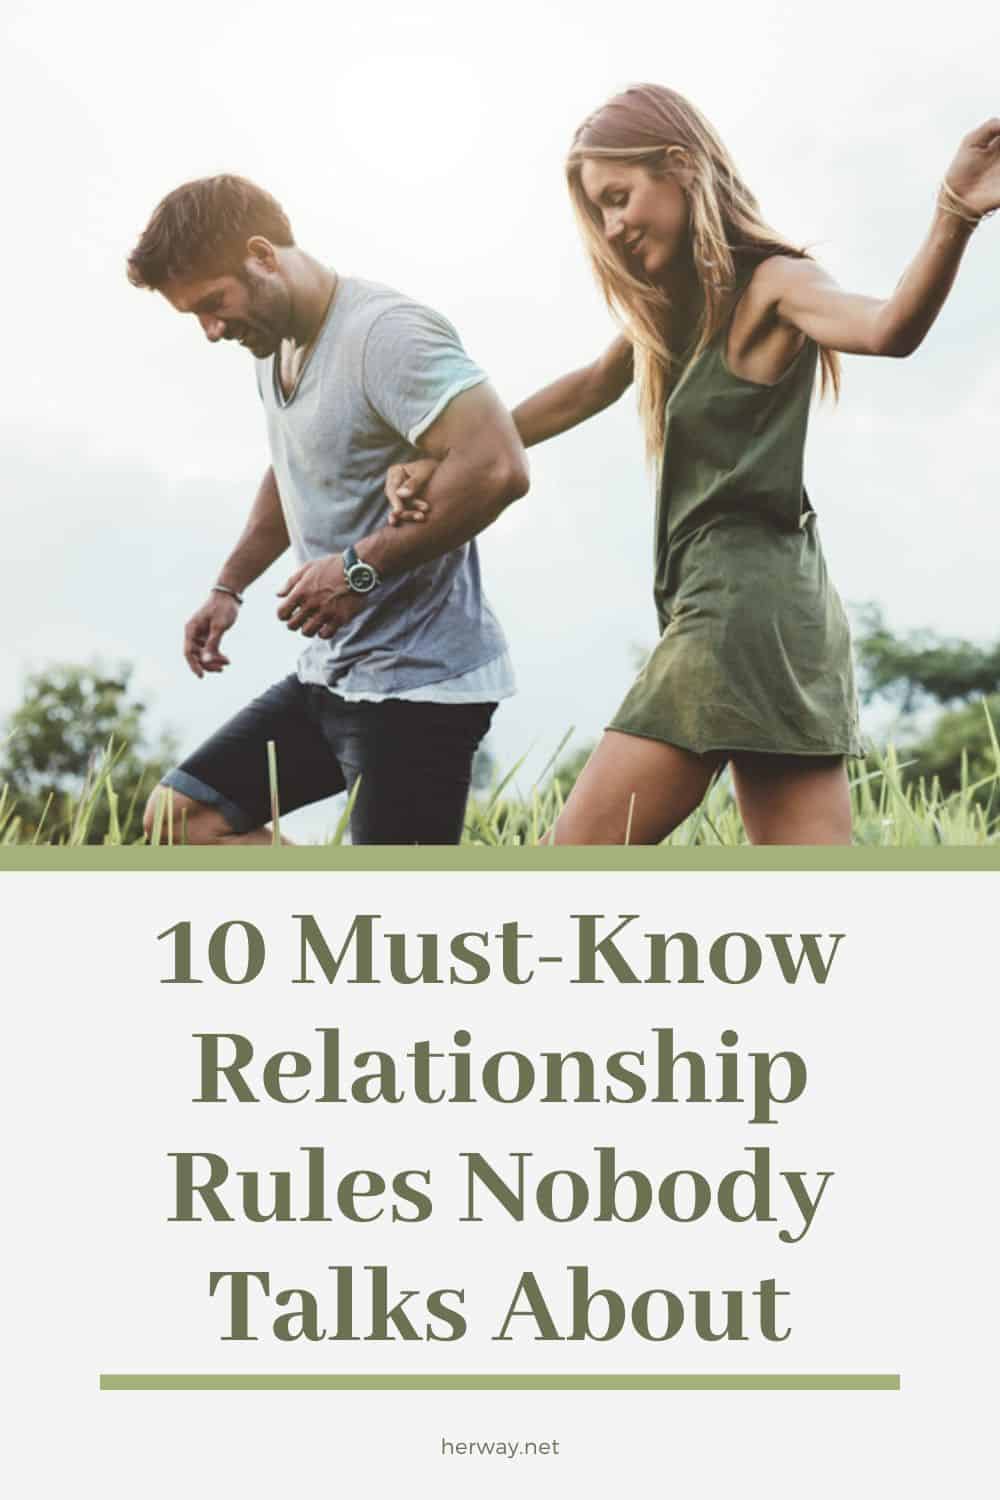 10 Must-Know Relationship Rules Nobody Talks About